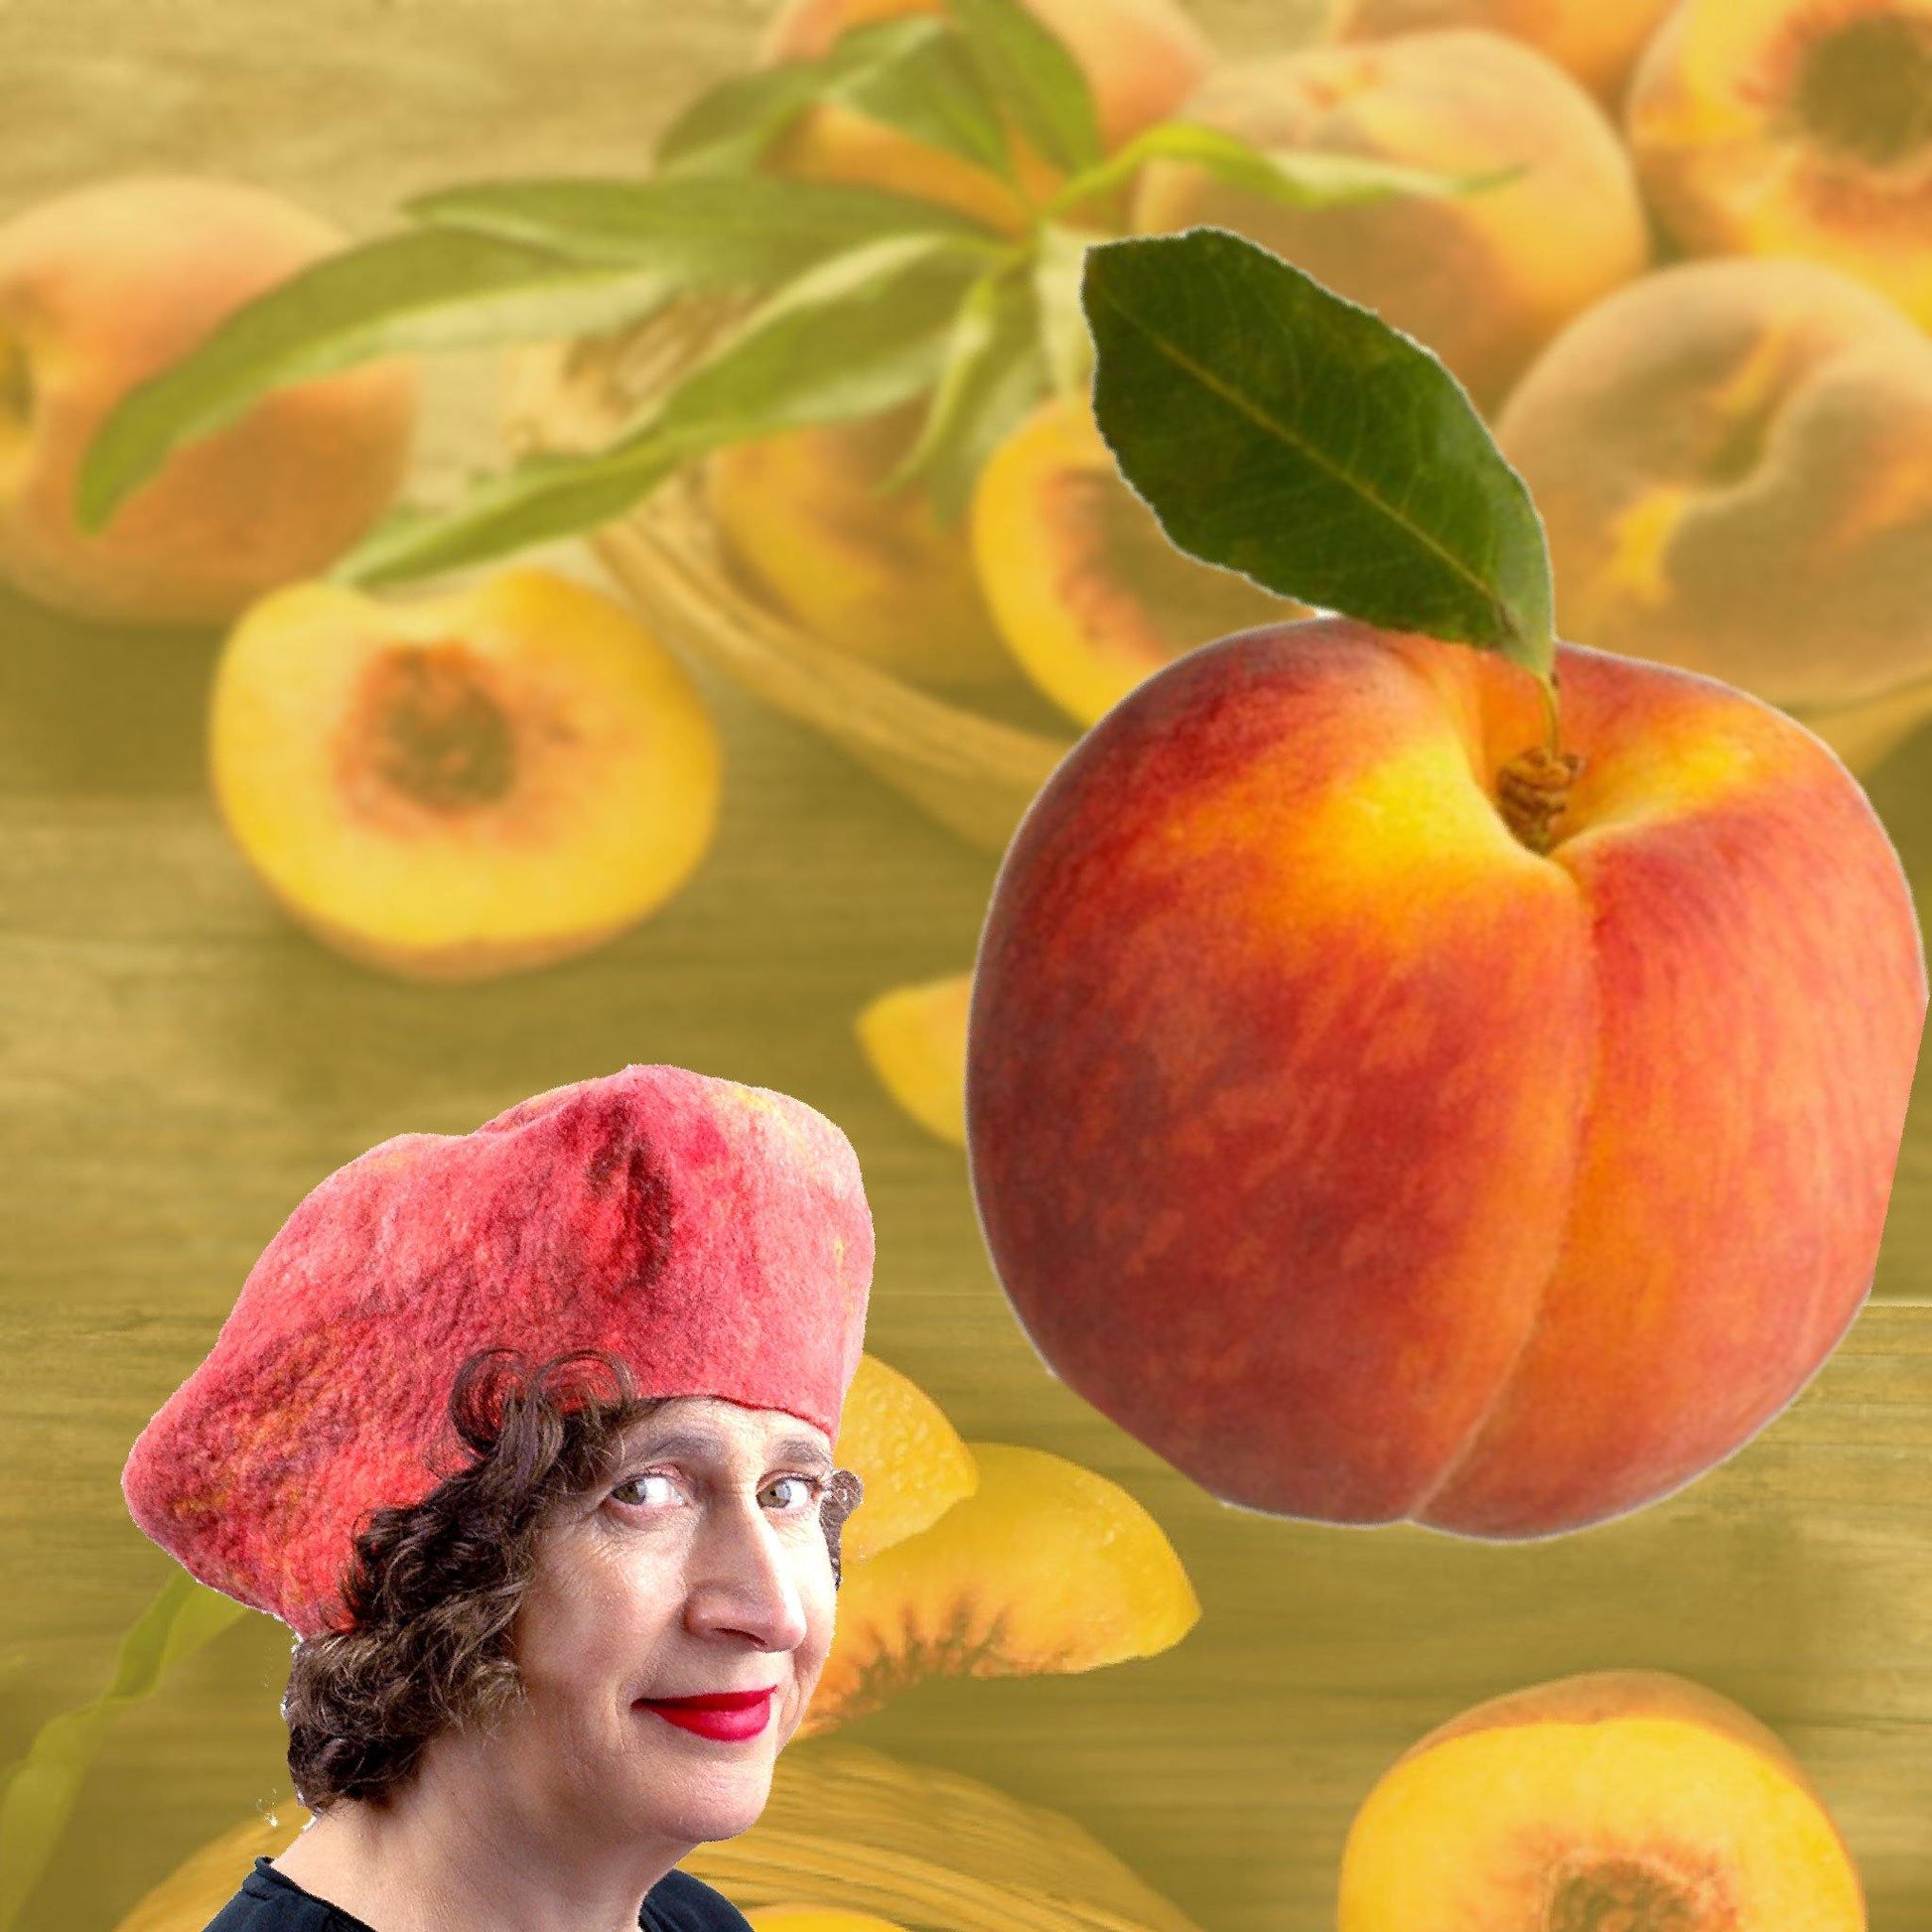 Peach Hat in digital collage with a bowl of fuzzy peaches.